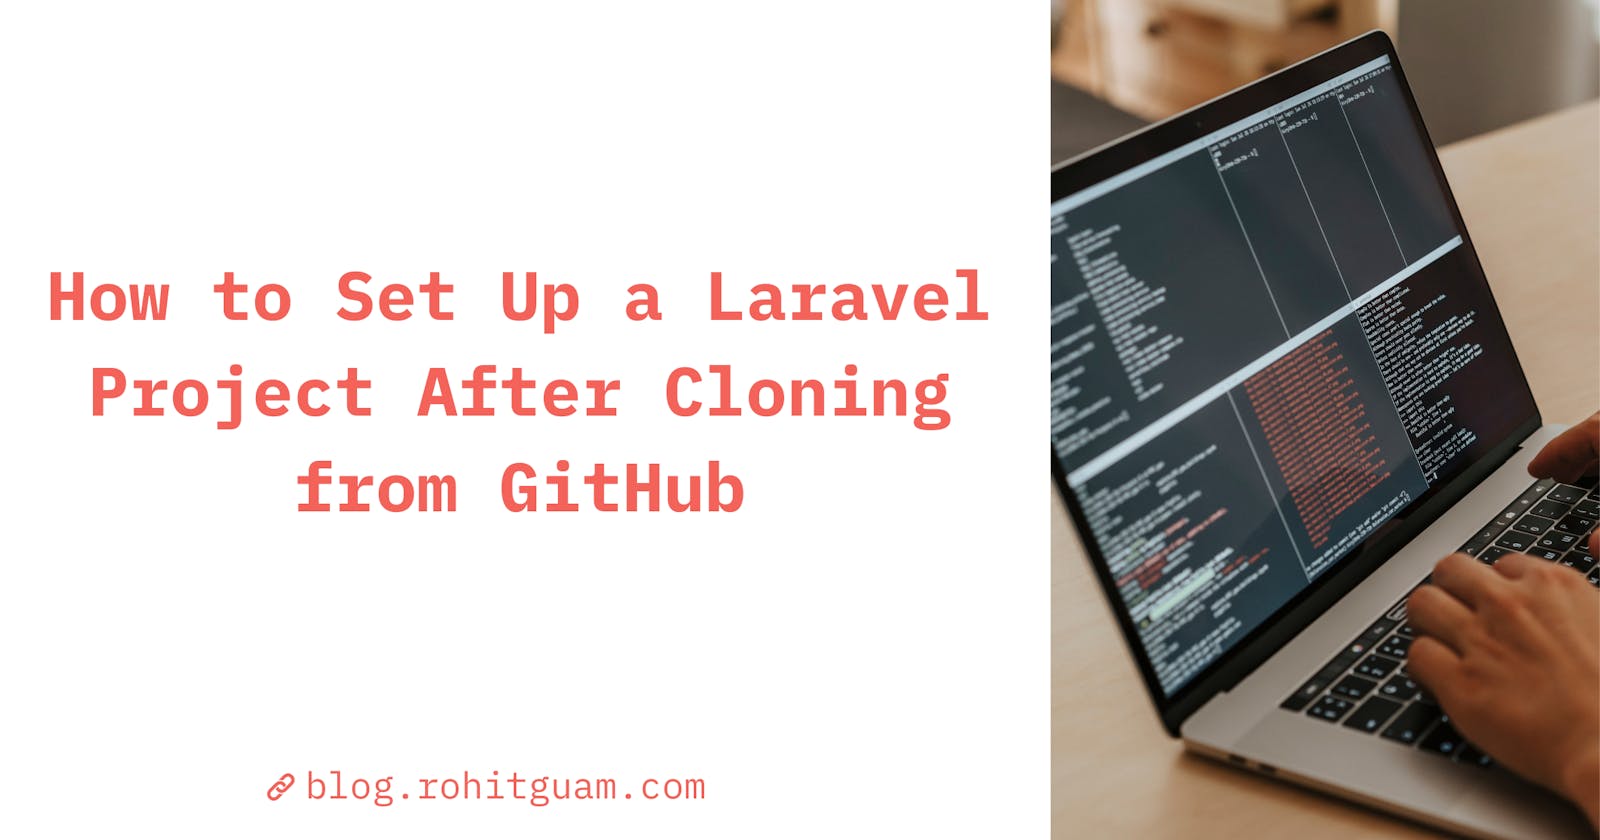 How to Set Up a Laravel Project After Cloning from GitHub